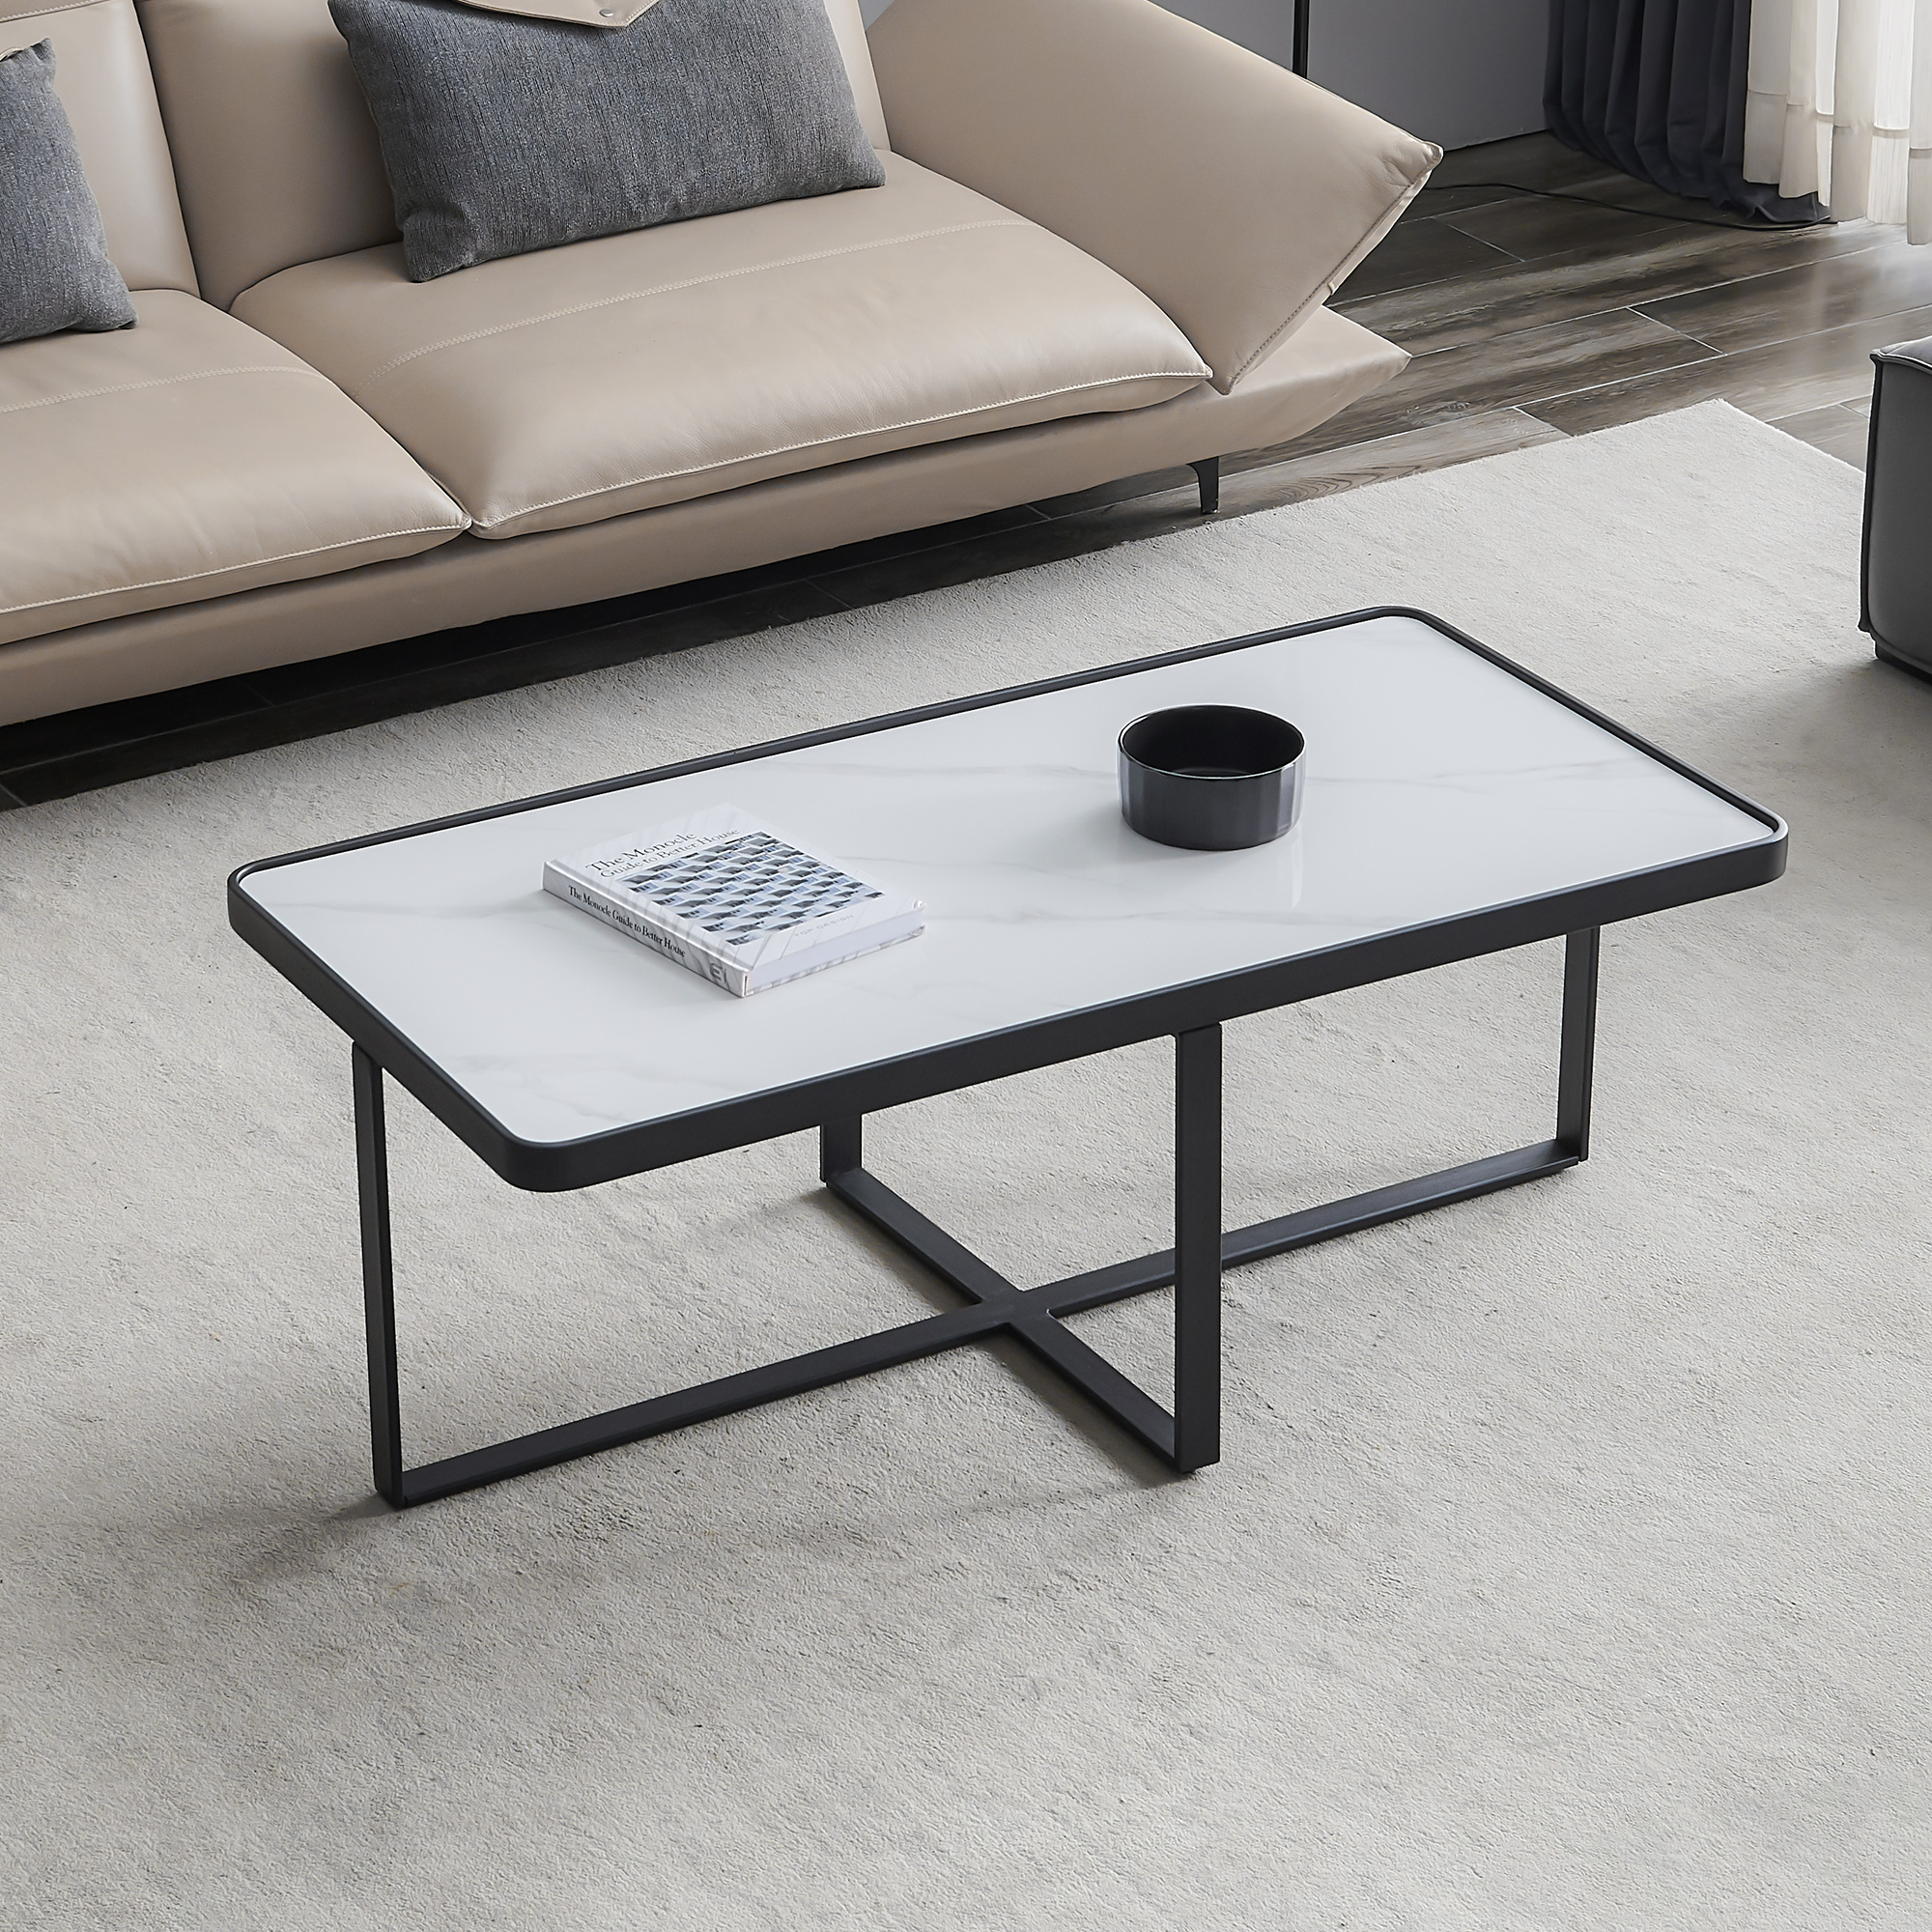 Minimalism rectangle coffee table,Black metal frame with sintered stone tabletop-CASAINC